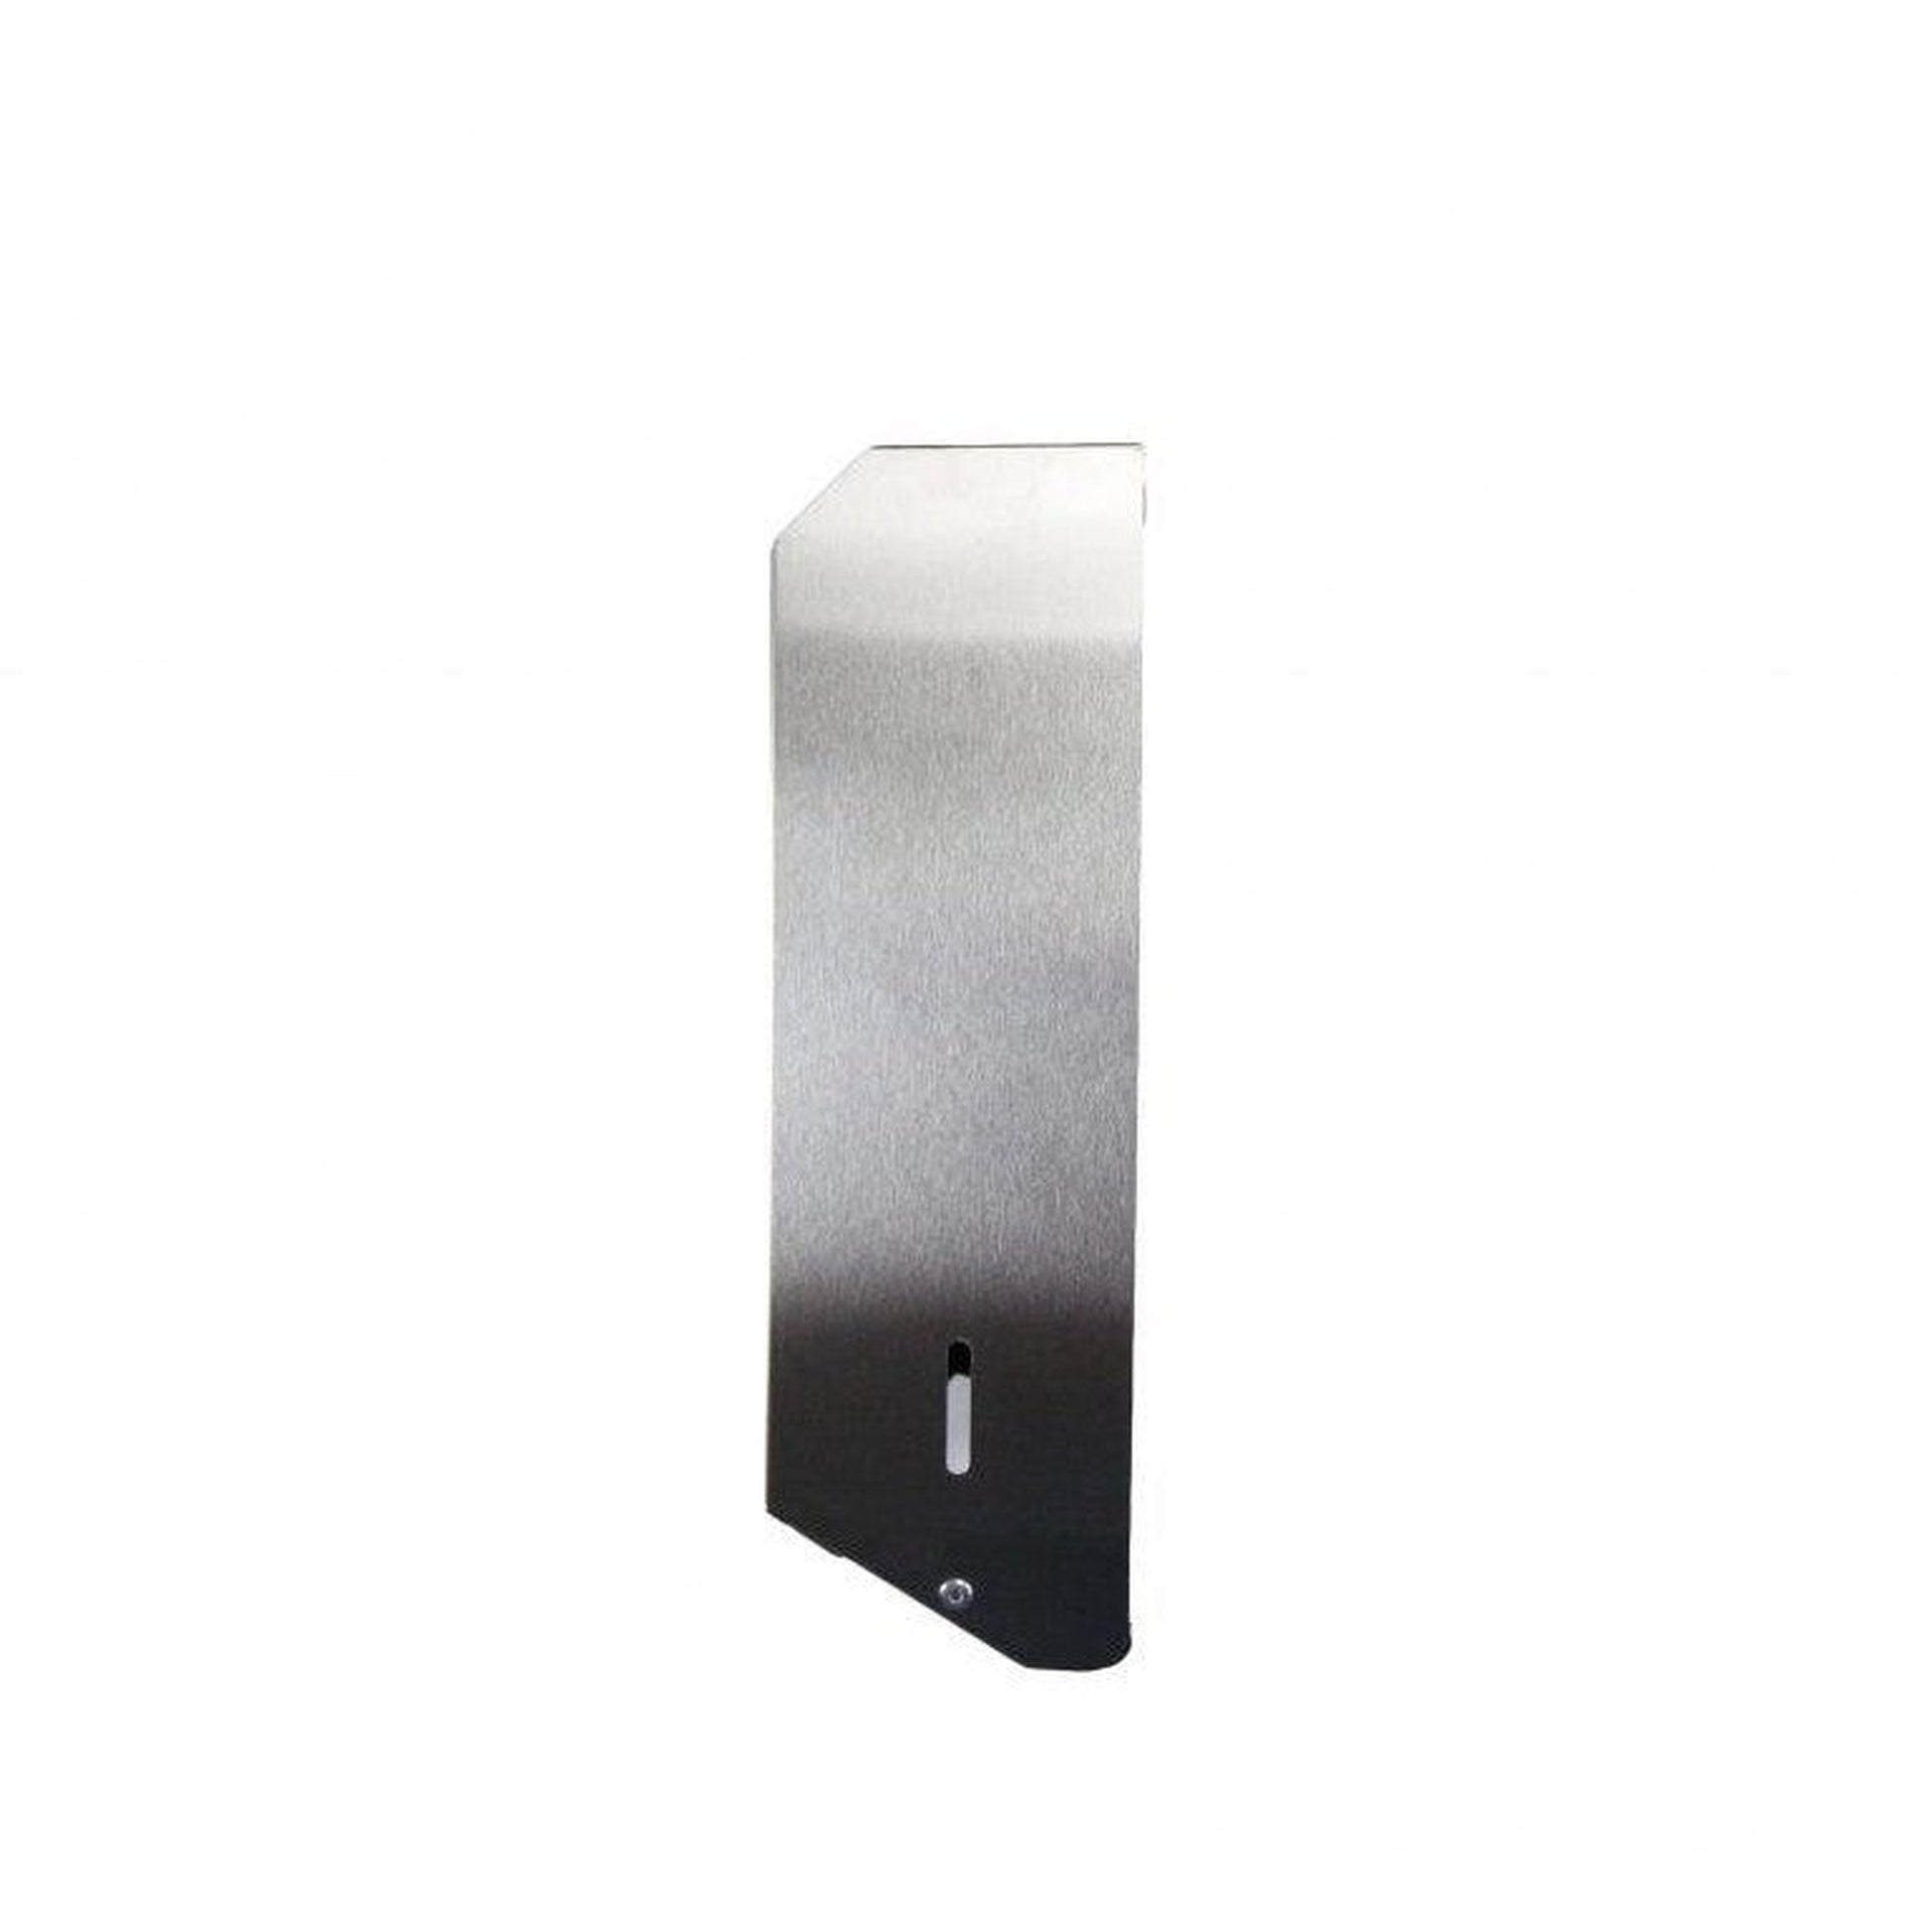 Frost 11 x 13.4 x 4.1 Stainless Steel Satin Paper Product Dispenser